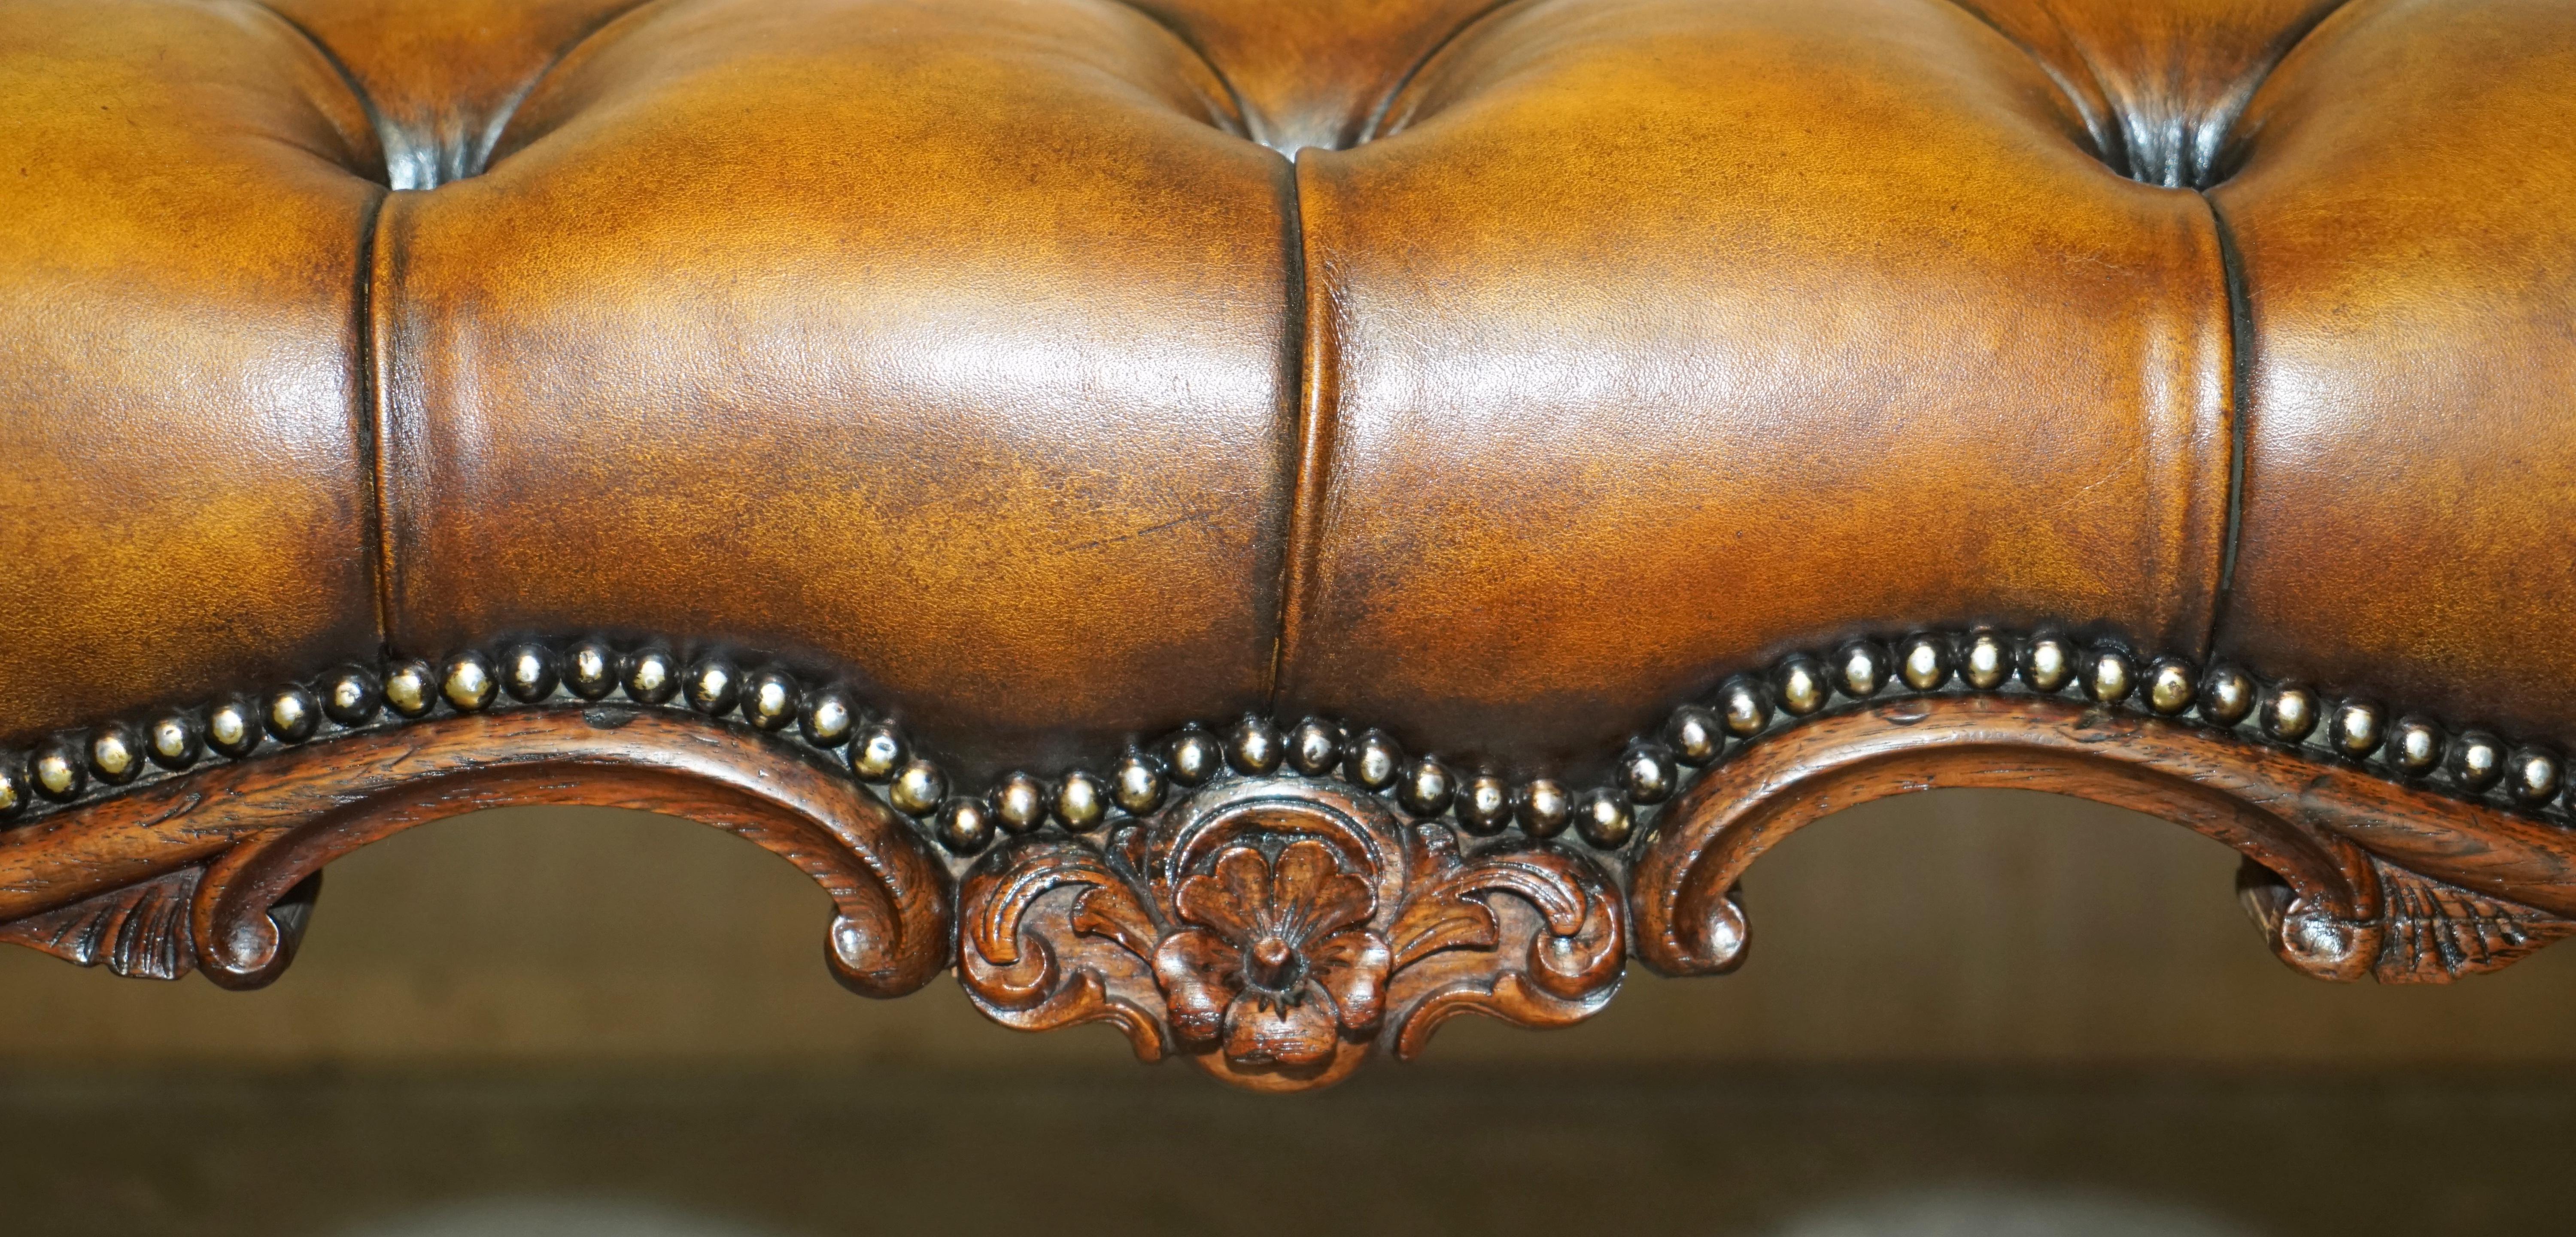 FINE ANTIQUE ViCTORIAN HARDWOOD SHOW FRAME CHESTERFIELD BROWN LEATHER FOOTSTOOL 2